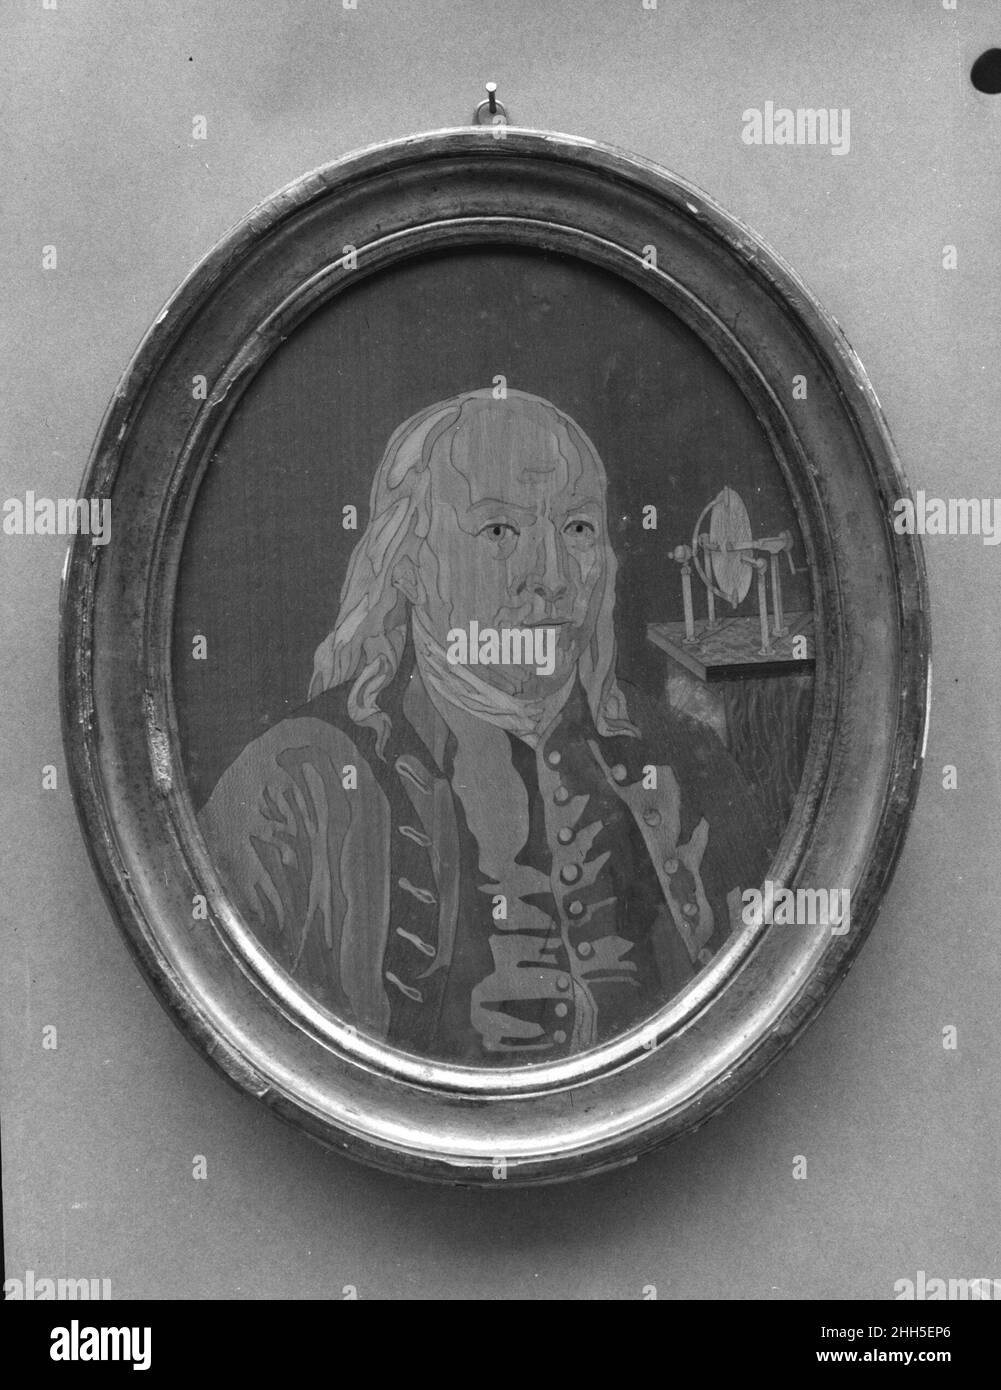 Portrait Panel of Benjamin Franklin ca. 1780. Portrait Panel of Benjamin Franklin. ca. 1780. Linden, holly, sycamore or harewood. Probably made in Germany Stock Photo